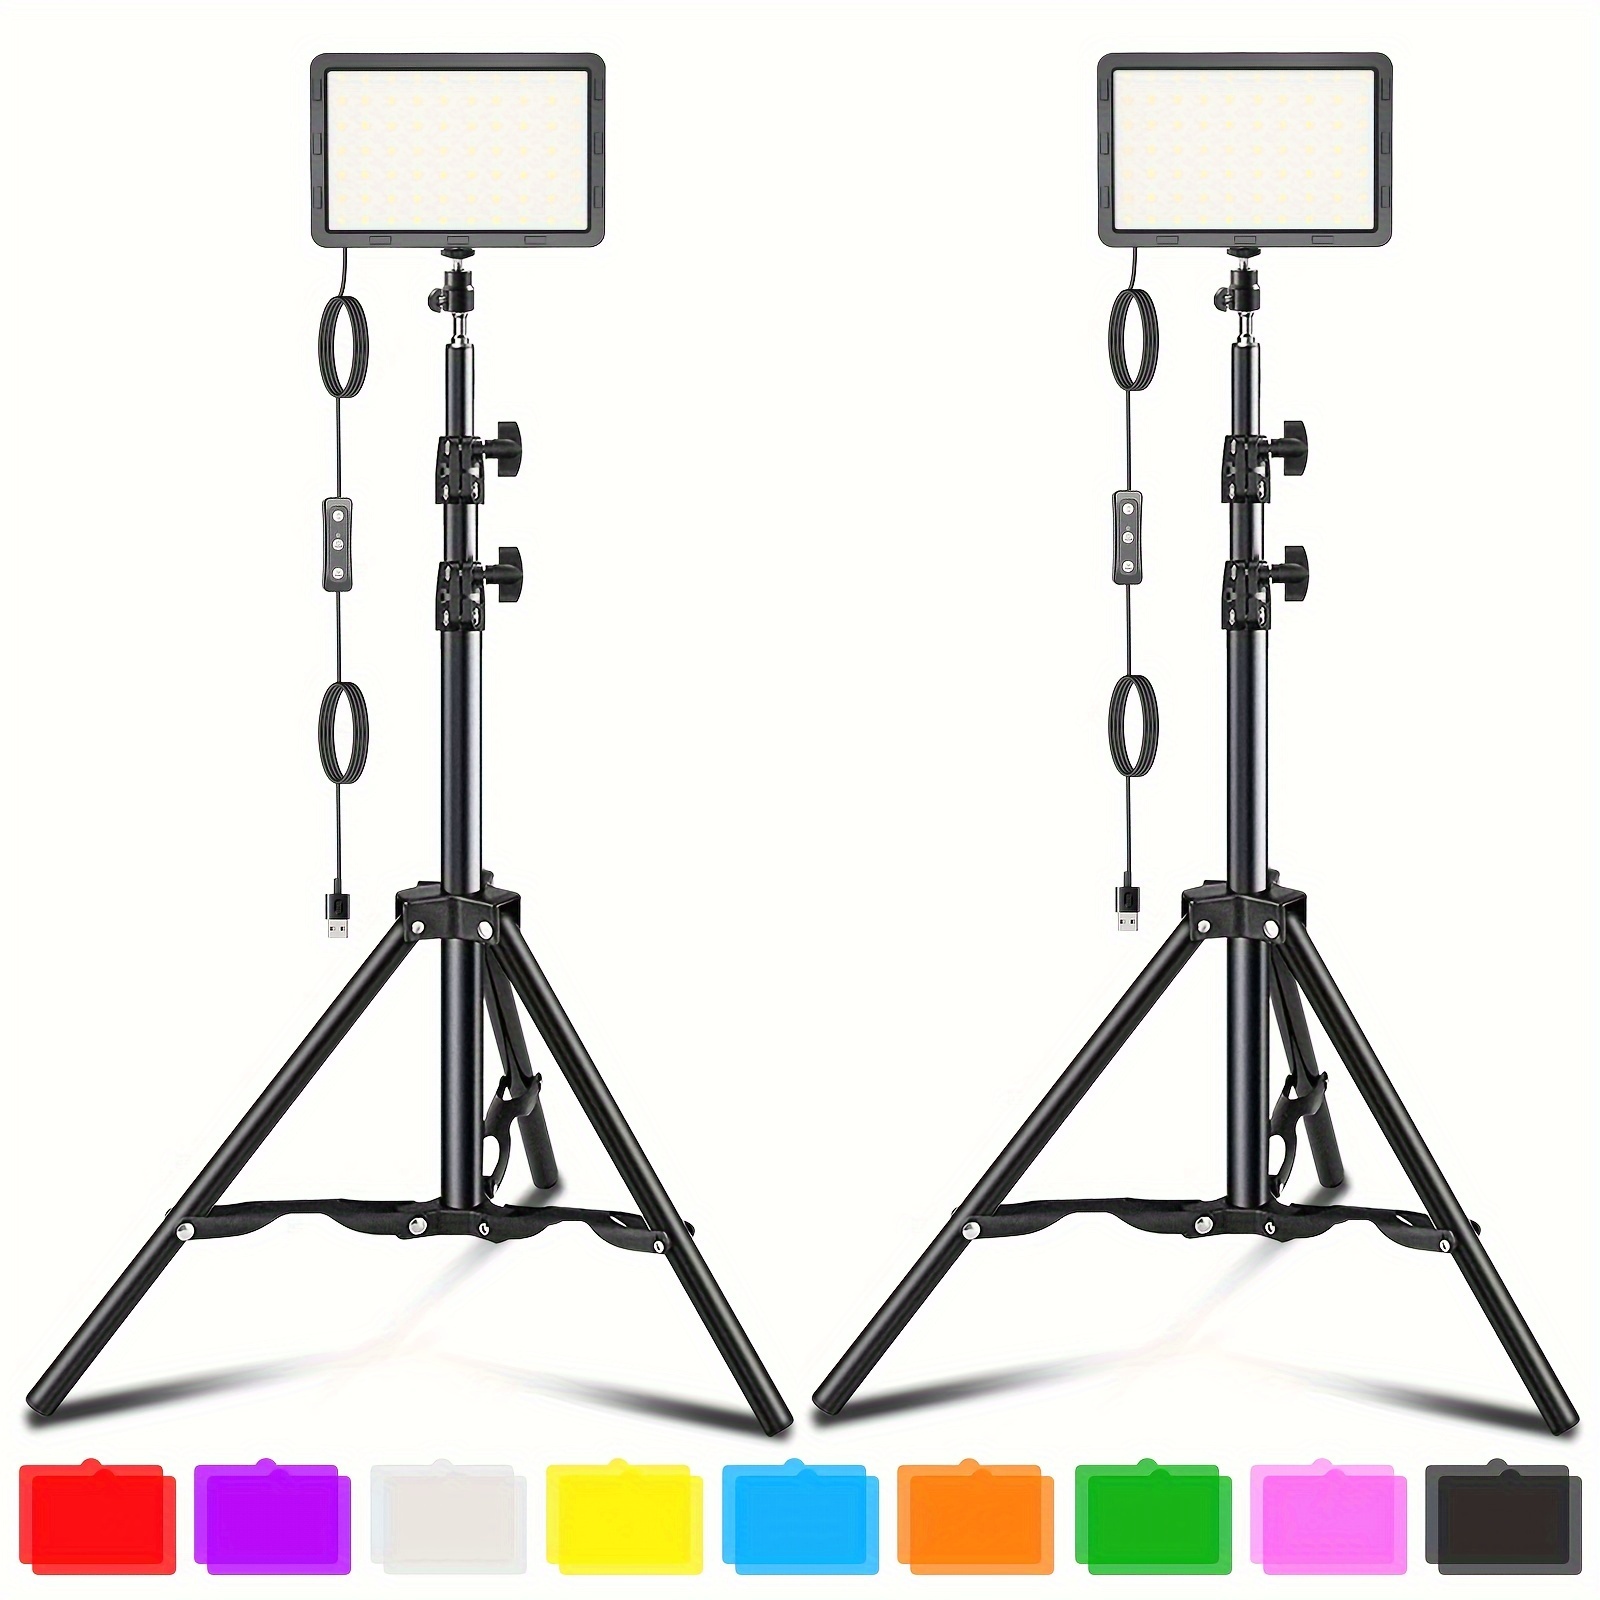 

Photography Video Lighting Kit, Led Studio Streaming Lights W/70 Beads & Color Filter For Camera Photo, Conference, Livestreaming, Portrait Shooting Pack Of 2